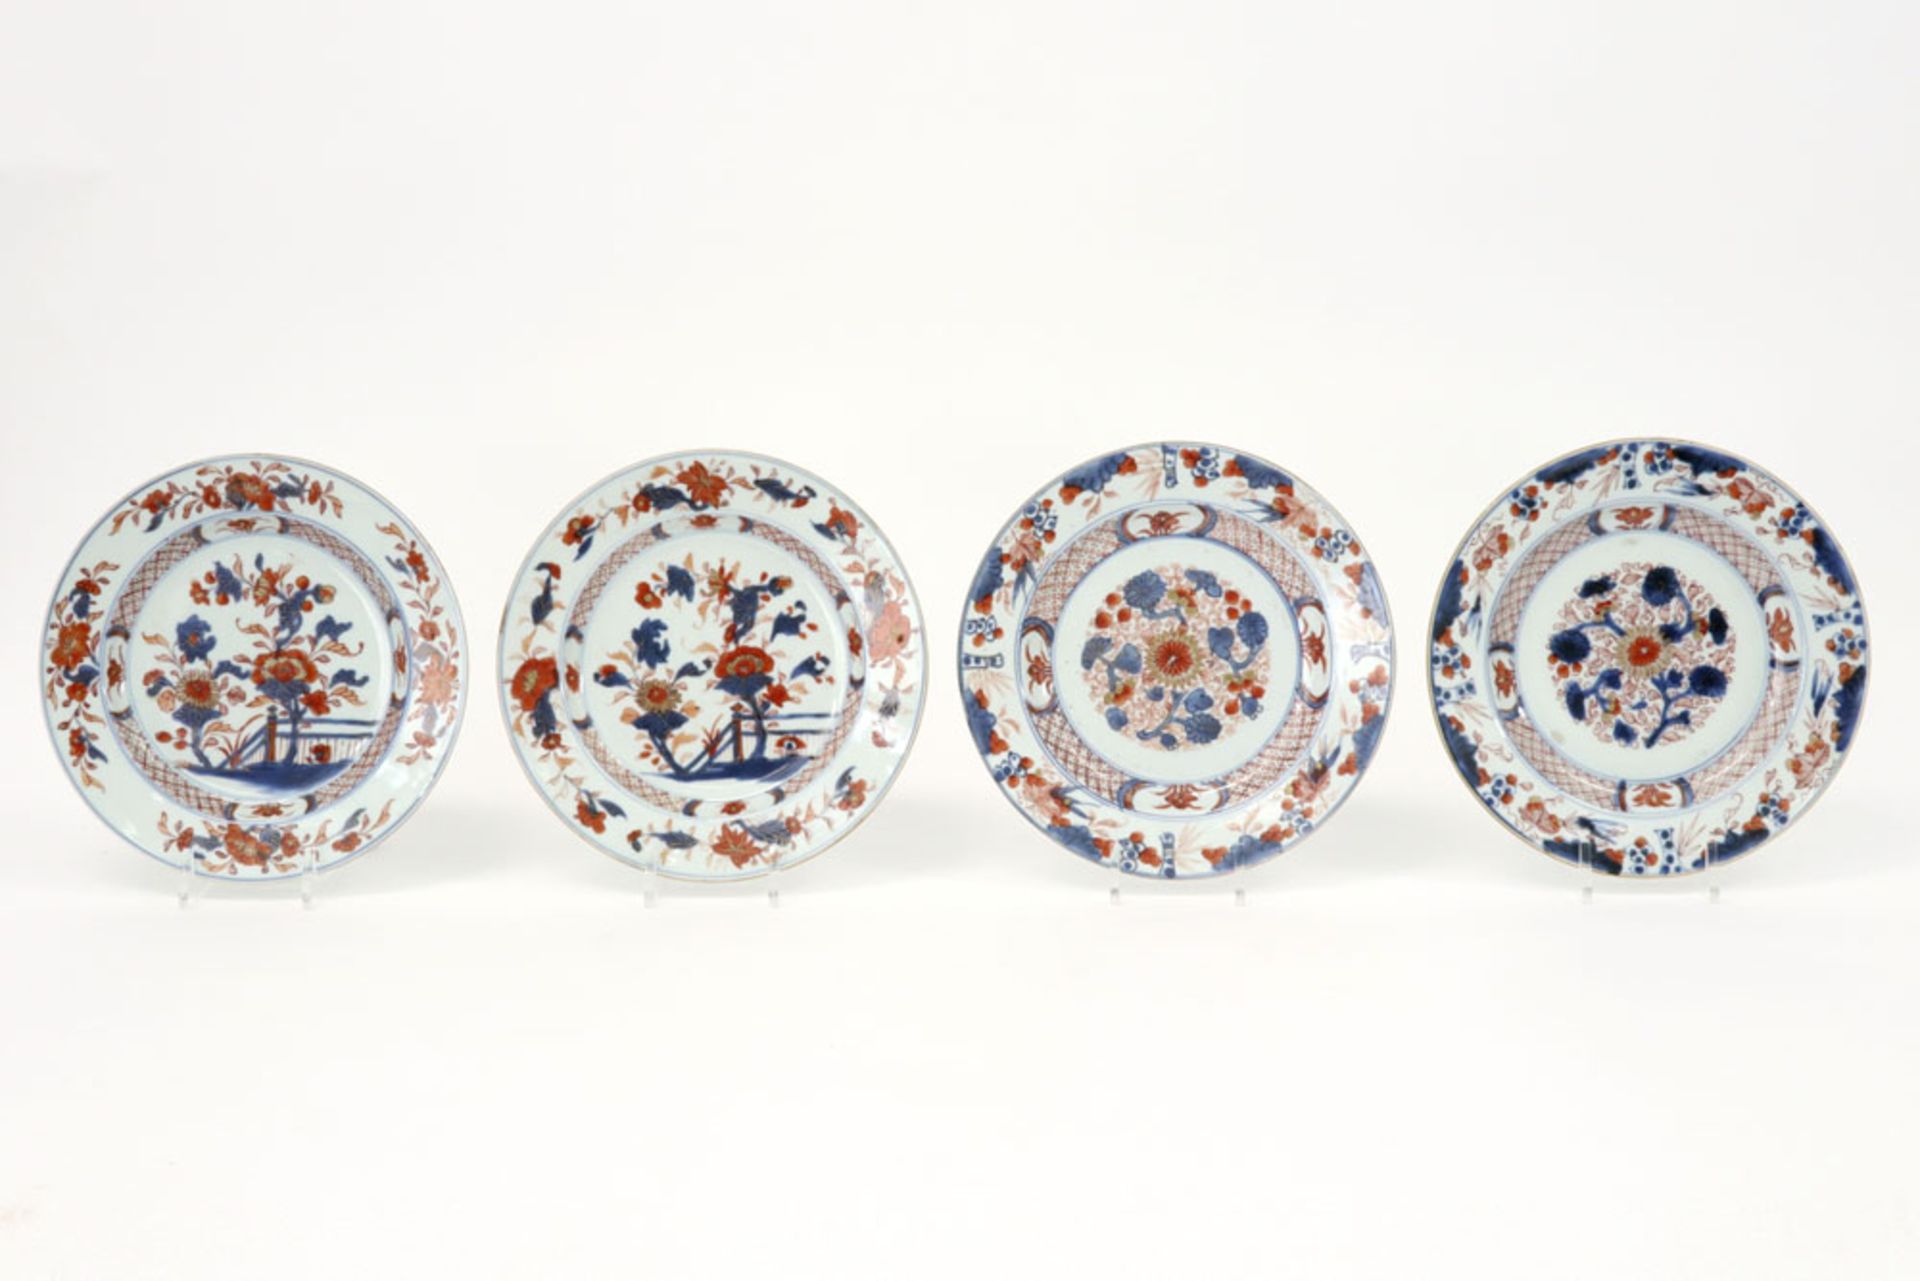 two pairs of 18th Cent. Chinese plates in porcelain with an Imari decor || Lot met twee paar